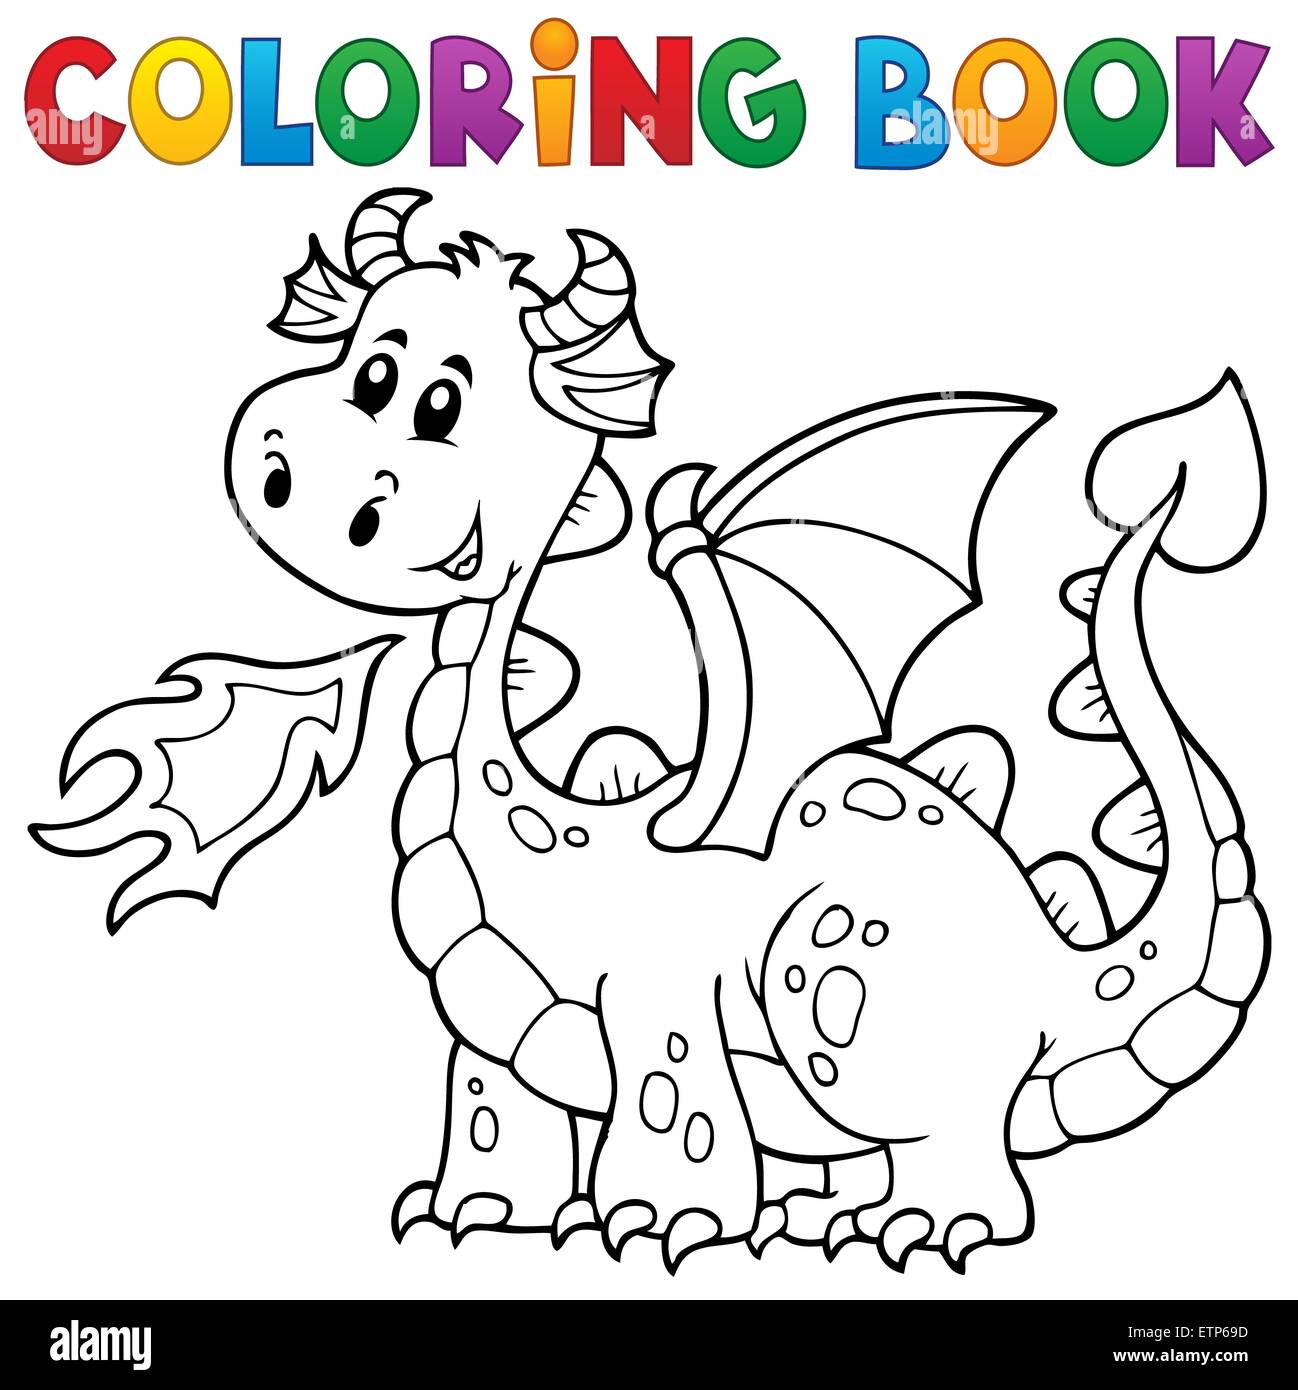 Coloring book with happy dragon - picture illustration Stock Photo - Alamy